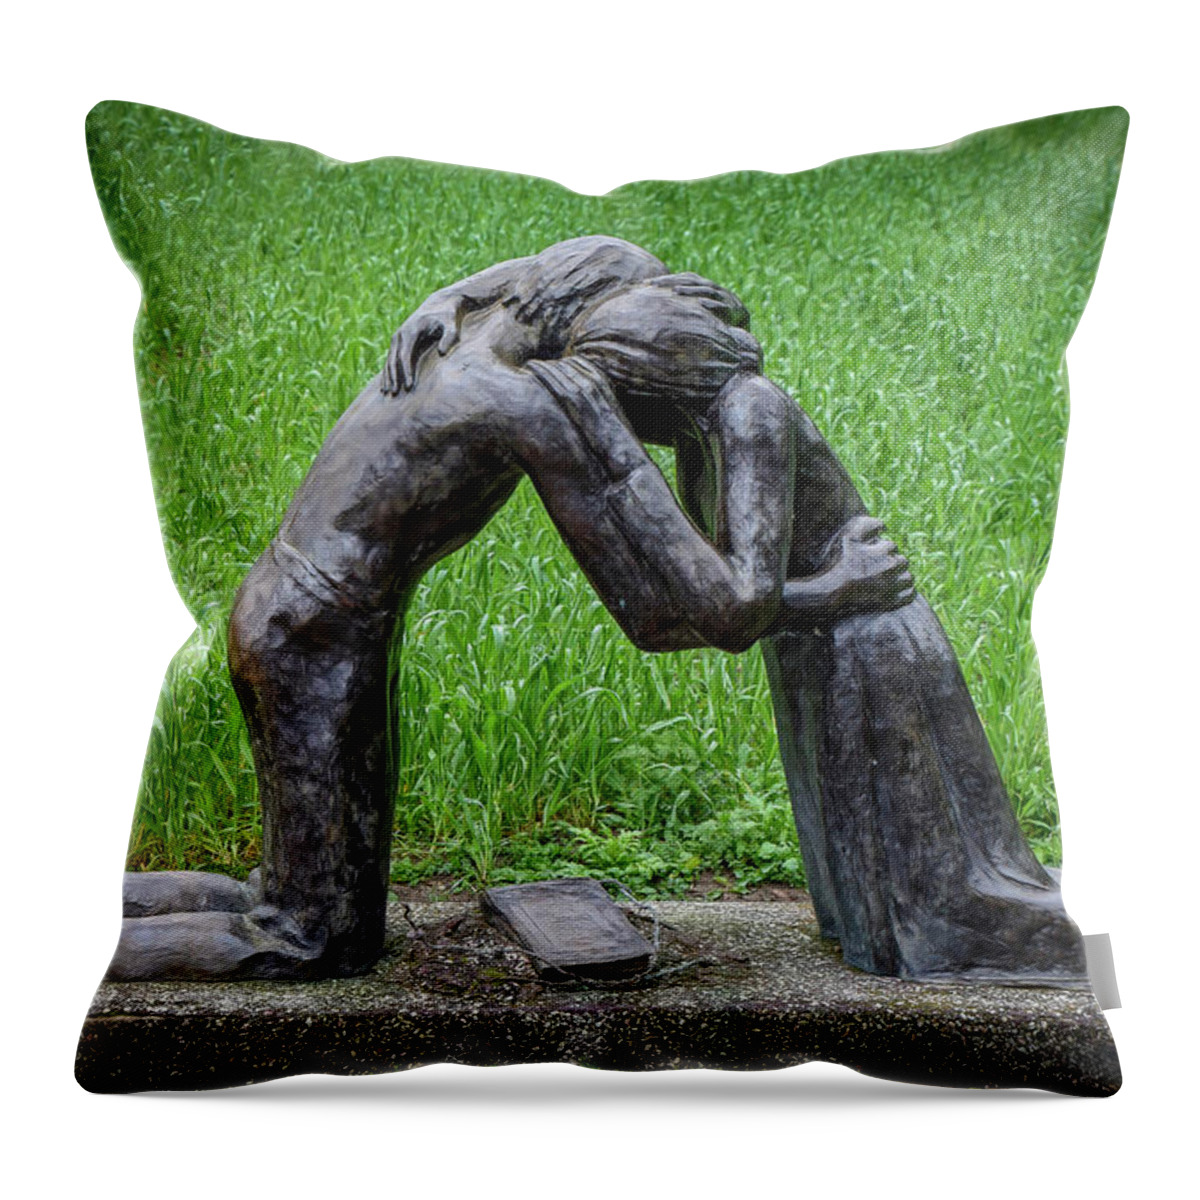 Sculpture Throw Pillow featuring the photograph Reunited by Will Wagner